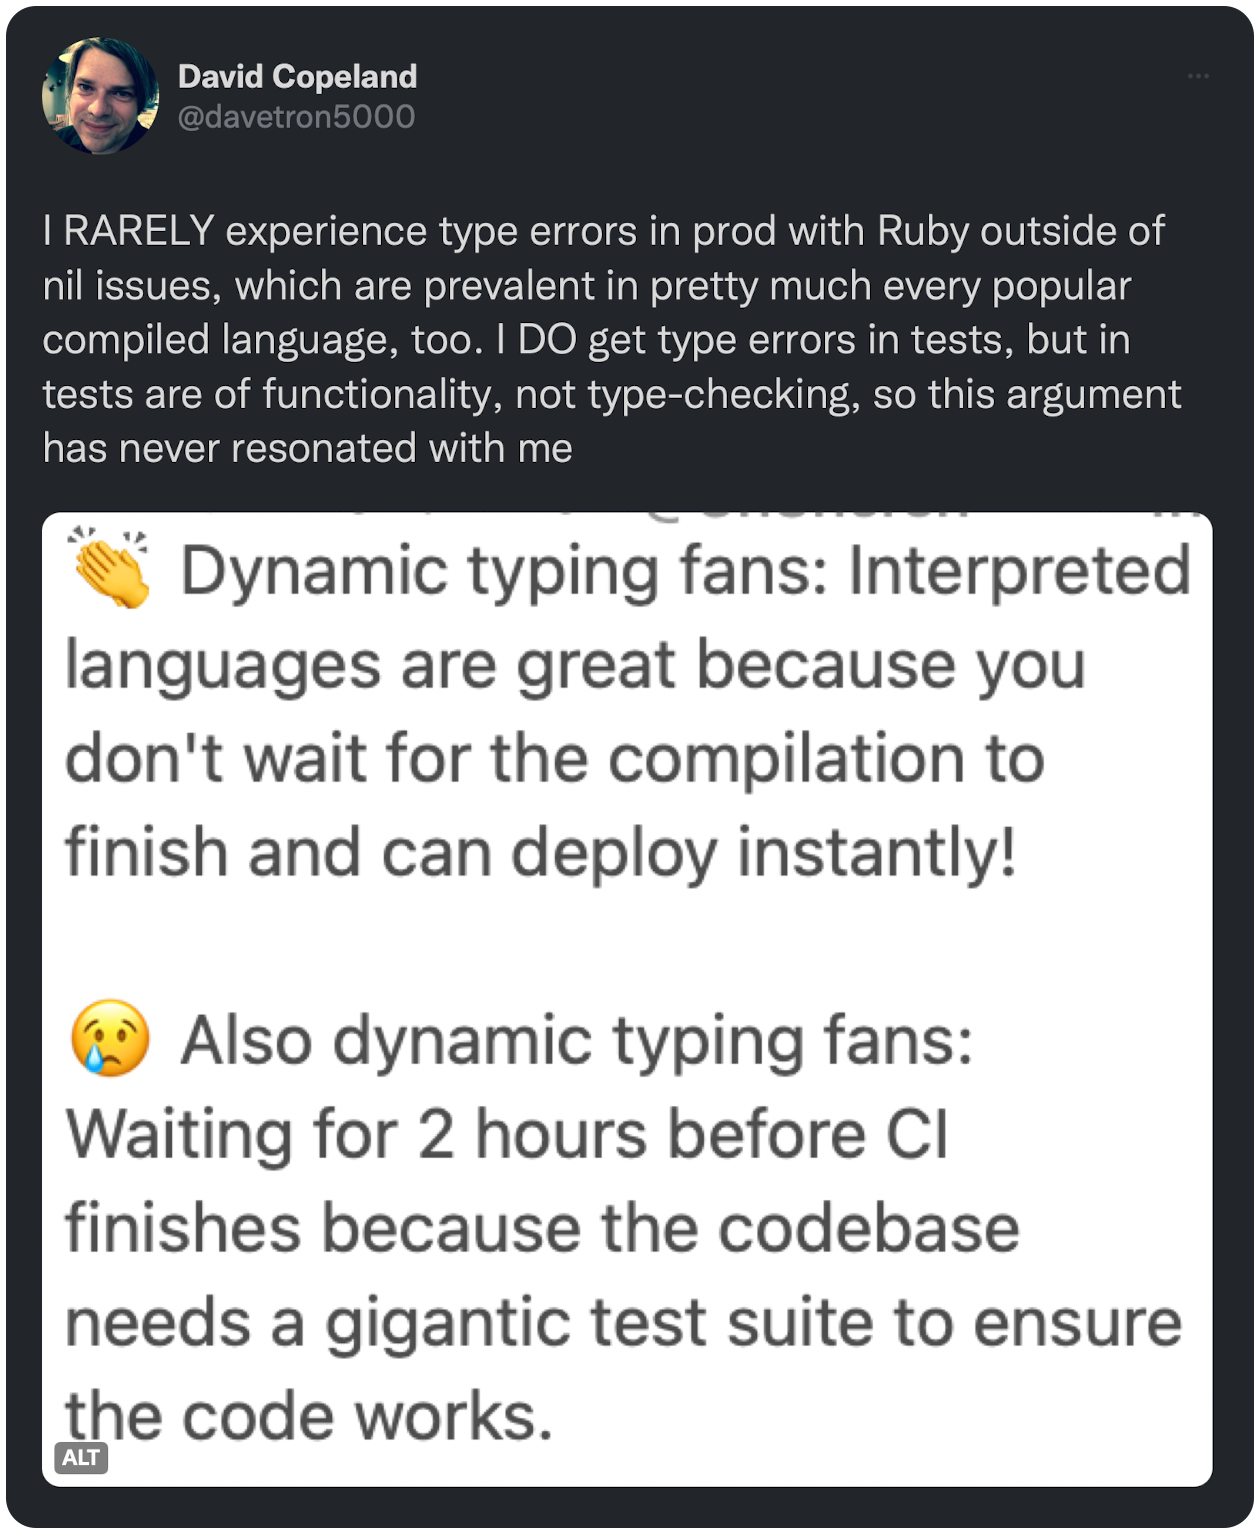 I RARELY experience type errors in prod with Ruby outside of nil issues, which are prevalent in pretty much every popular compiled language, too. I DO get type errors in tests, but in tests are of functionality, not type-checking, so this argument has never resonated with me